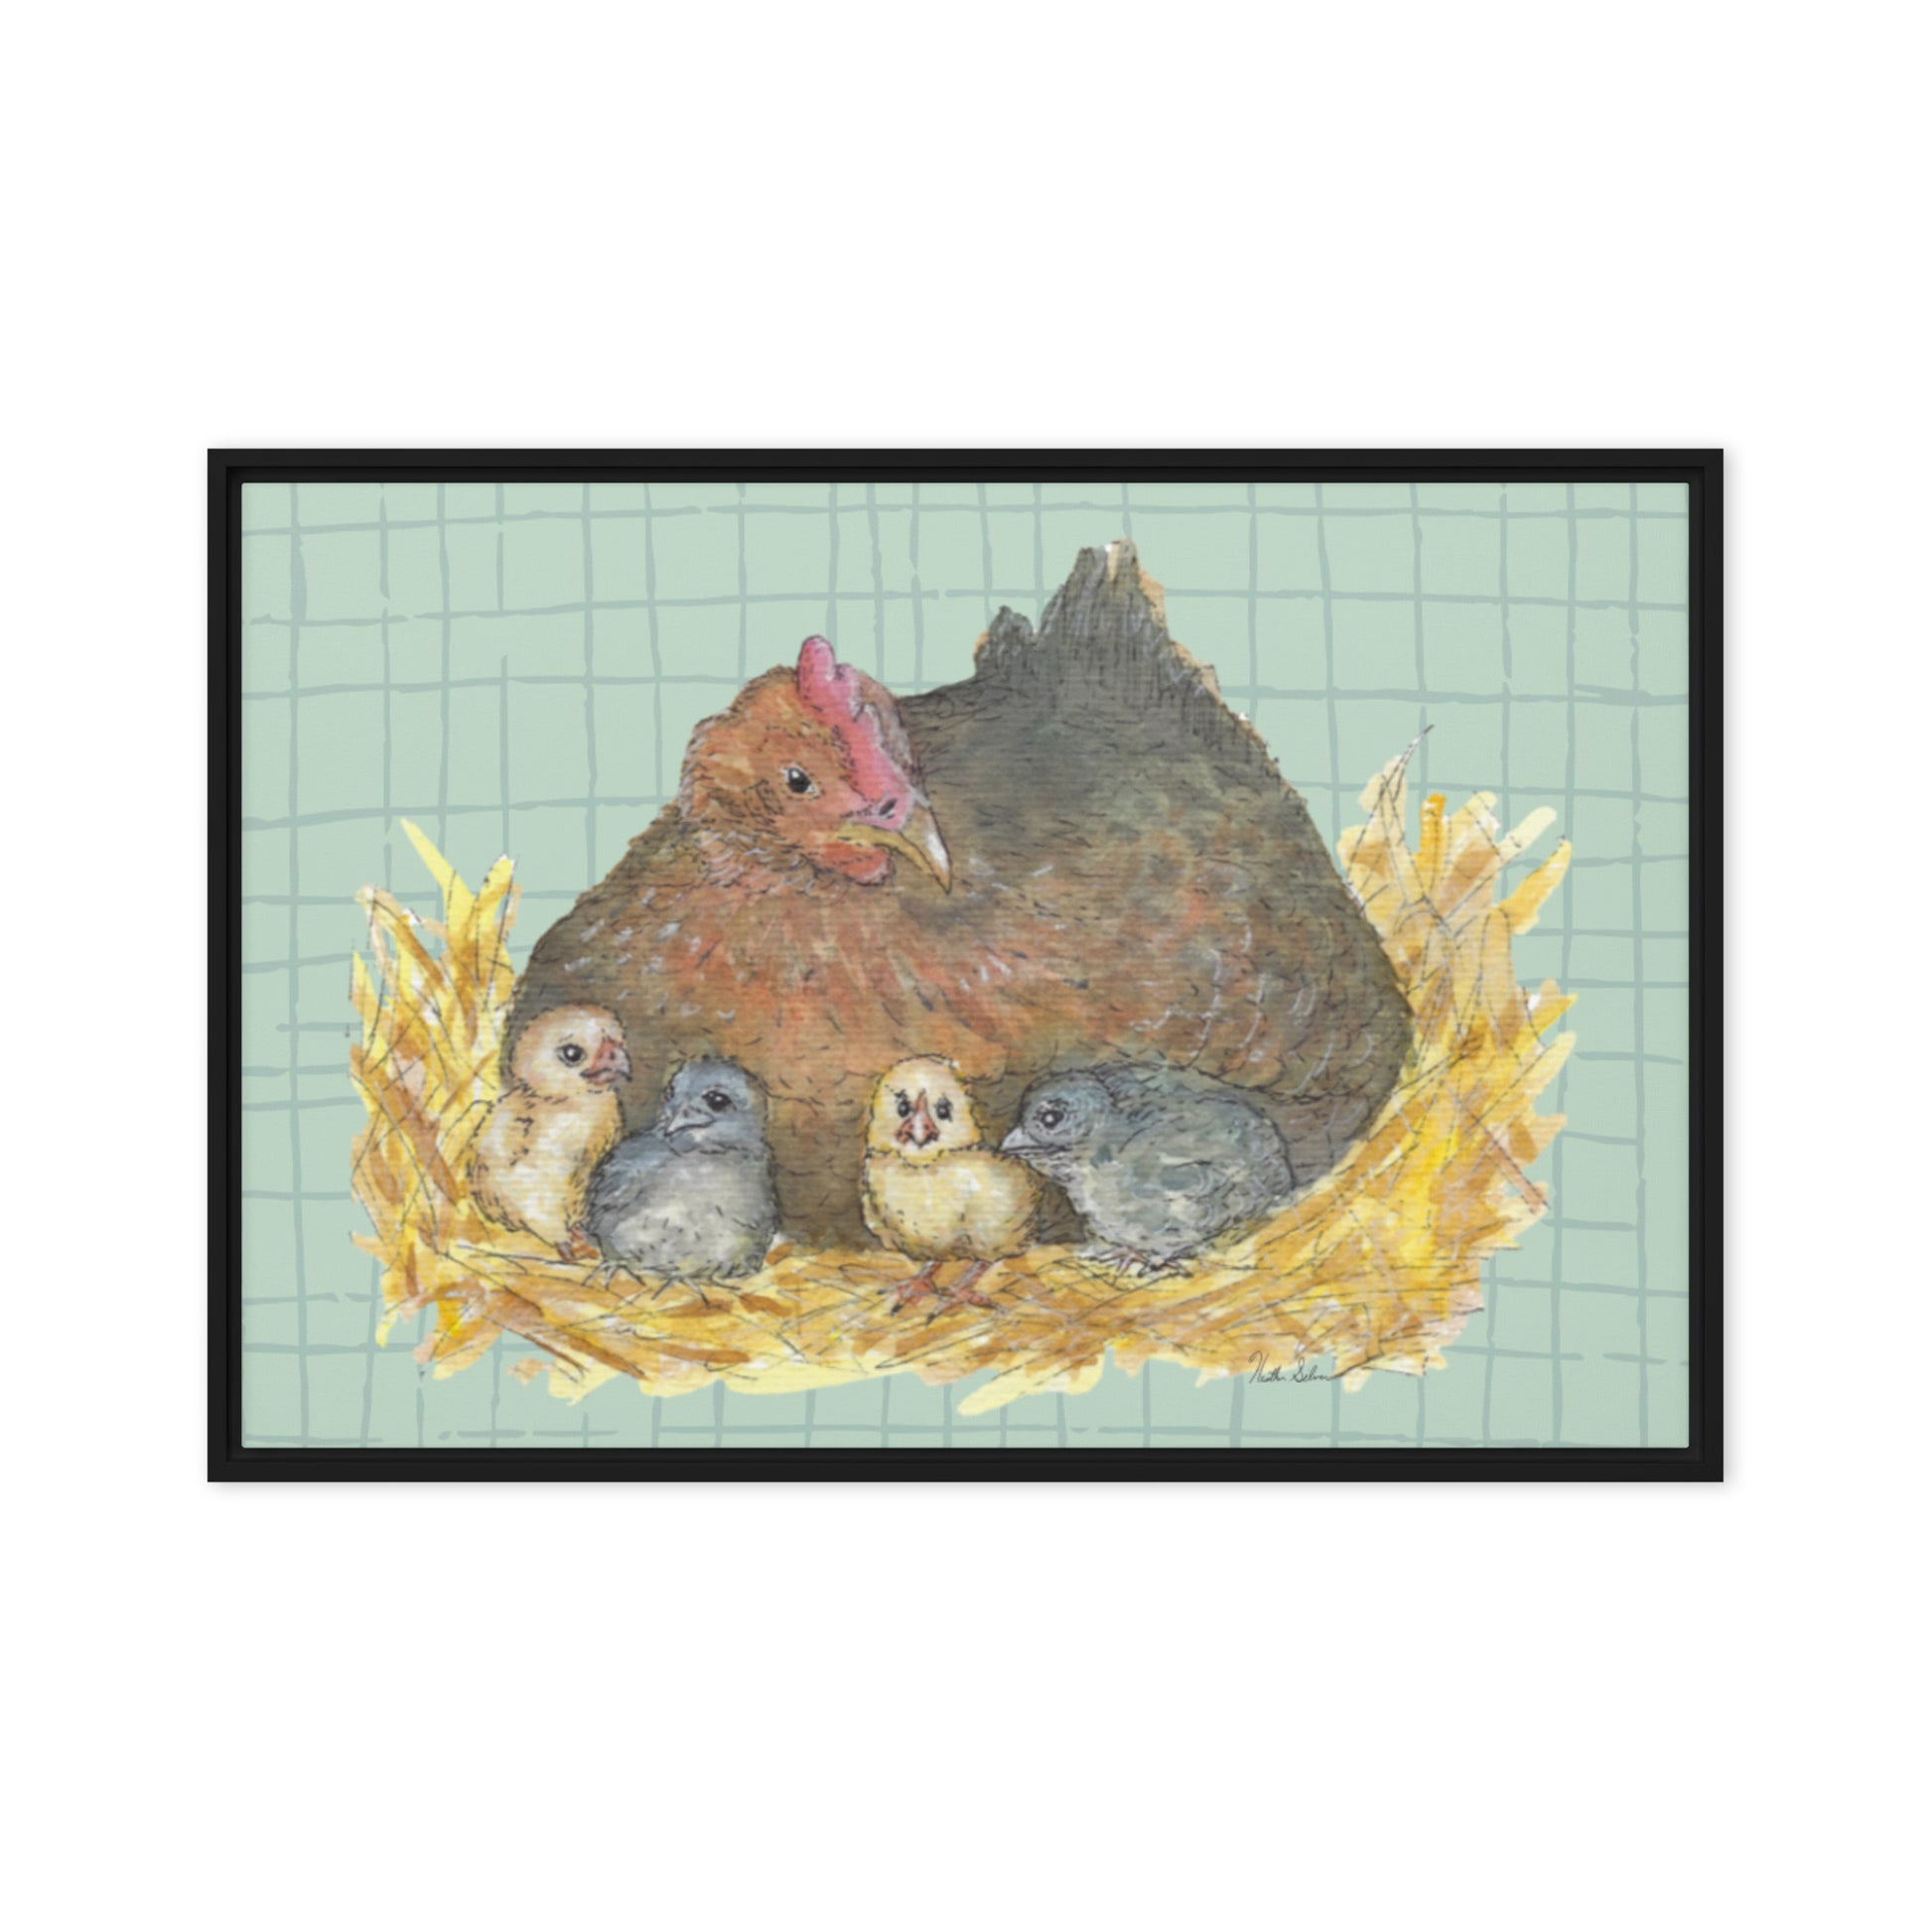 24 by 36 inch Mother Hen Floating Frame Canvas Wall Art. Heather Silver's watercolor painting, Mother Hen, with a green crosshatched background, printed on a stretched canvas and framed with a dark black pine frame. Hanging hardware included.